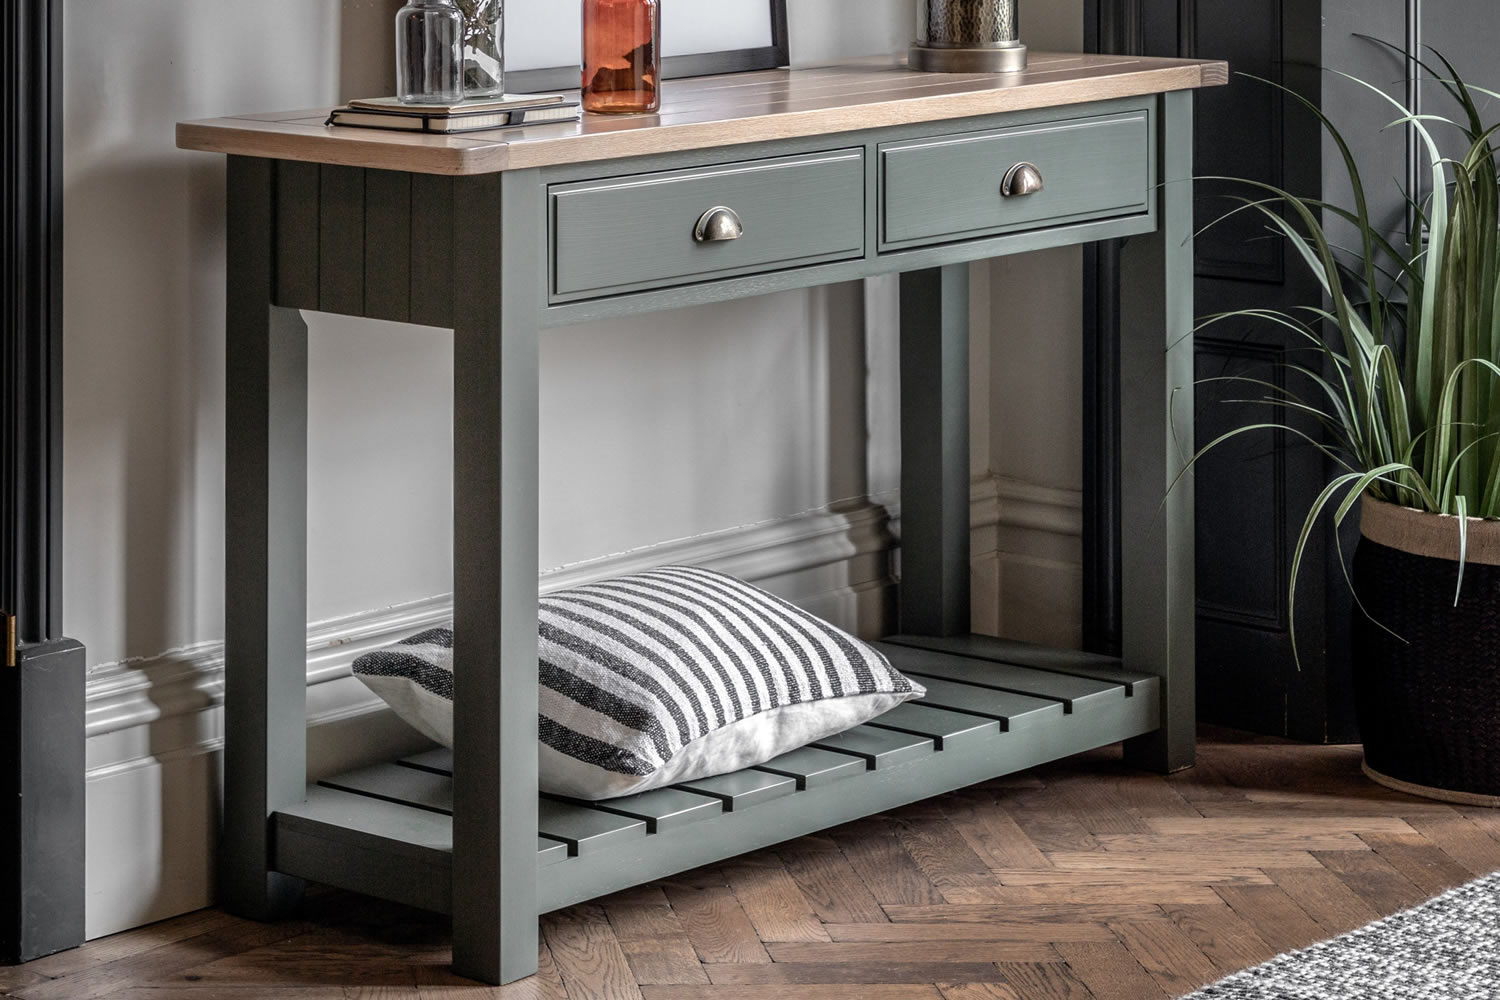 View Eton Moss 2Drawer Console Crafted From Oak Pine MDF 2 Spacious Drawers Lower Slatted Storage Shelf Sleek Metal Handles Easy Assembly information